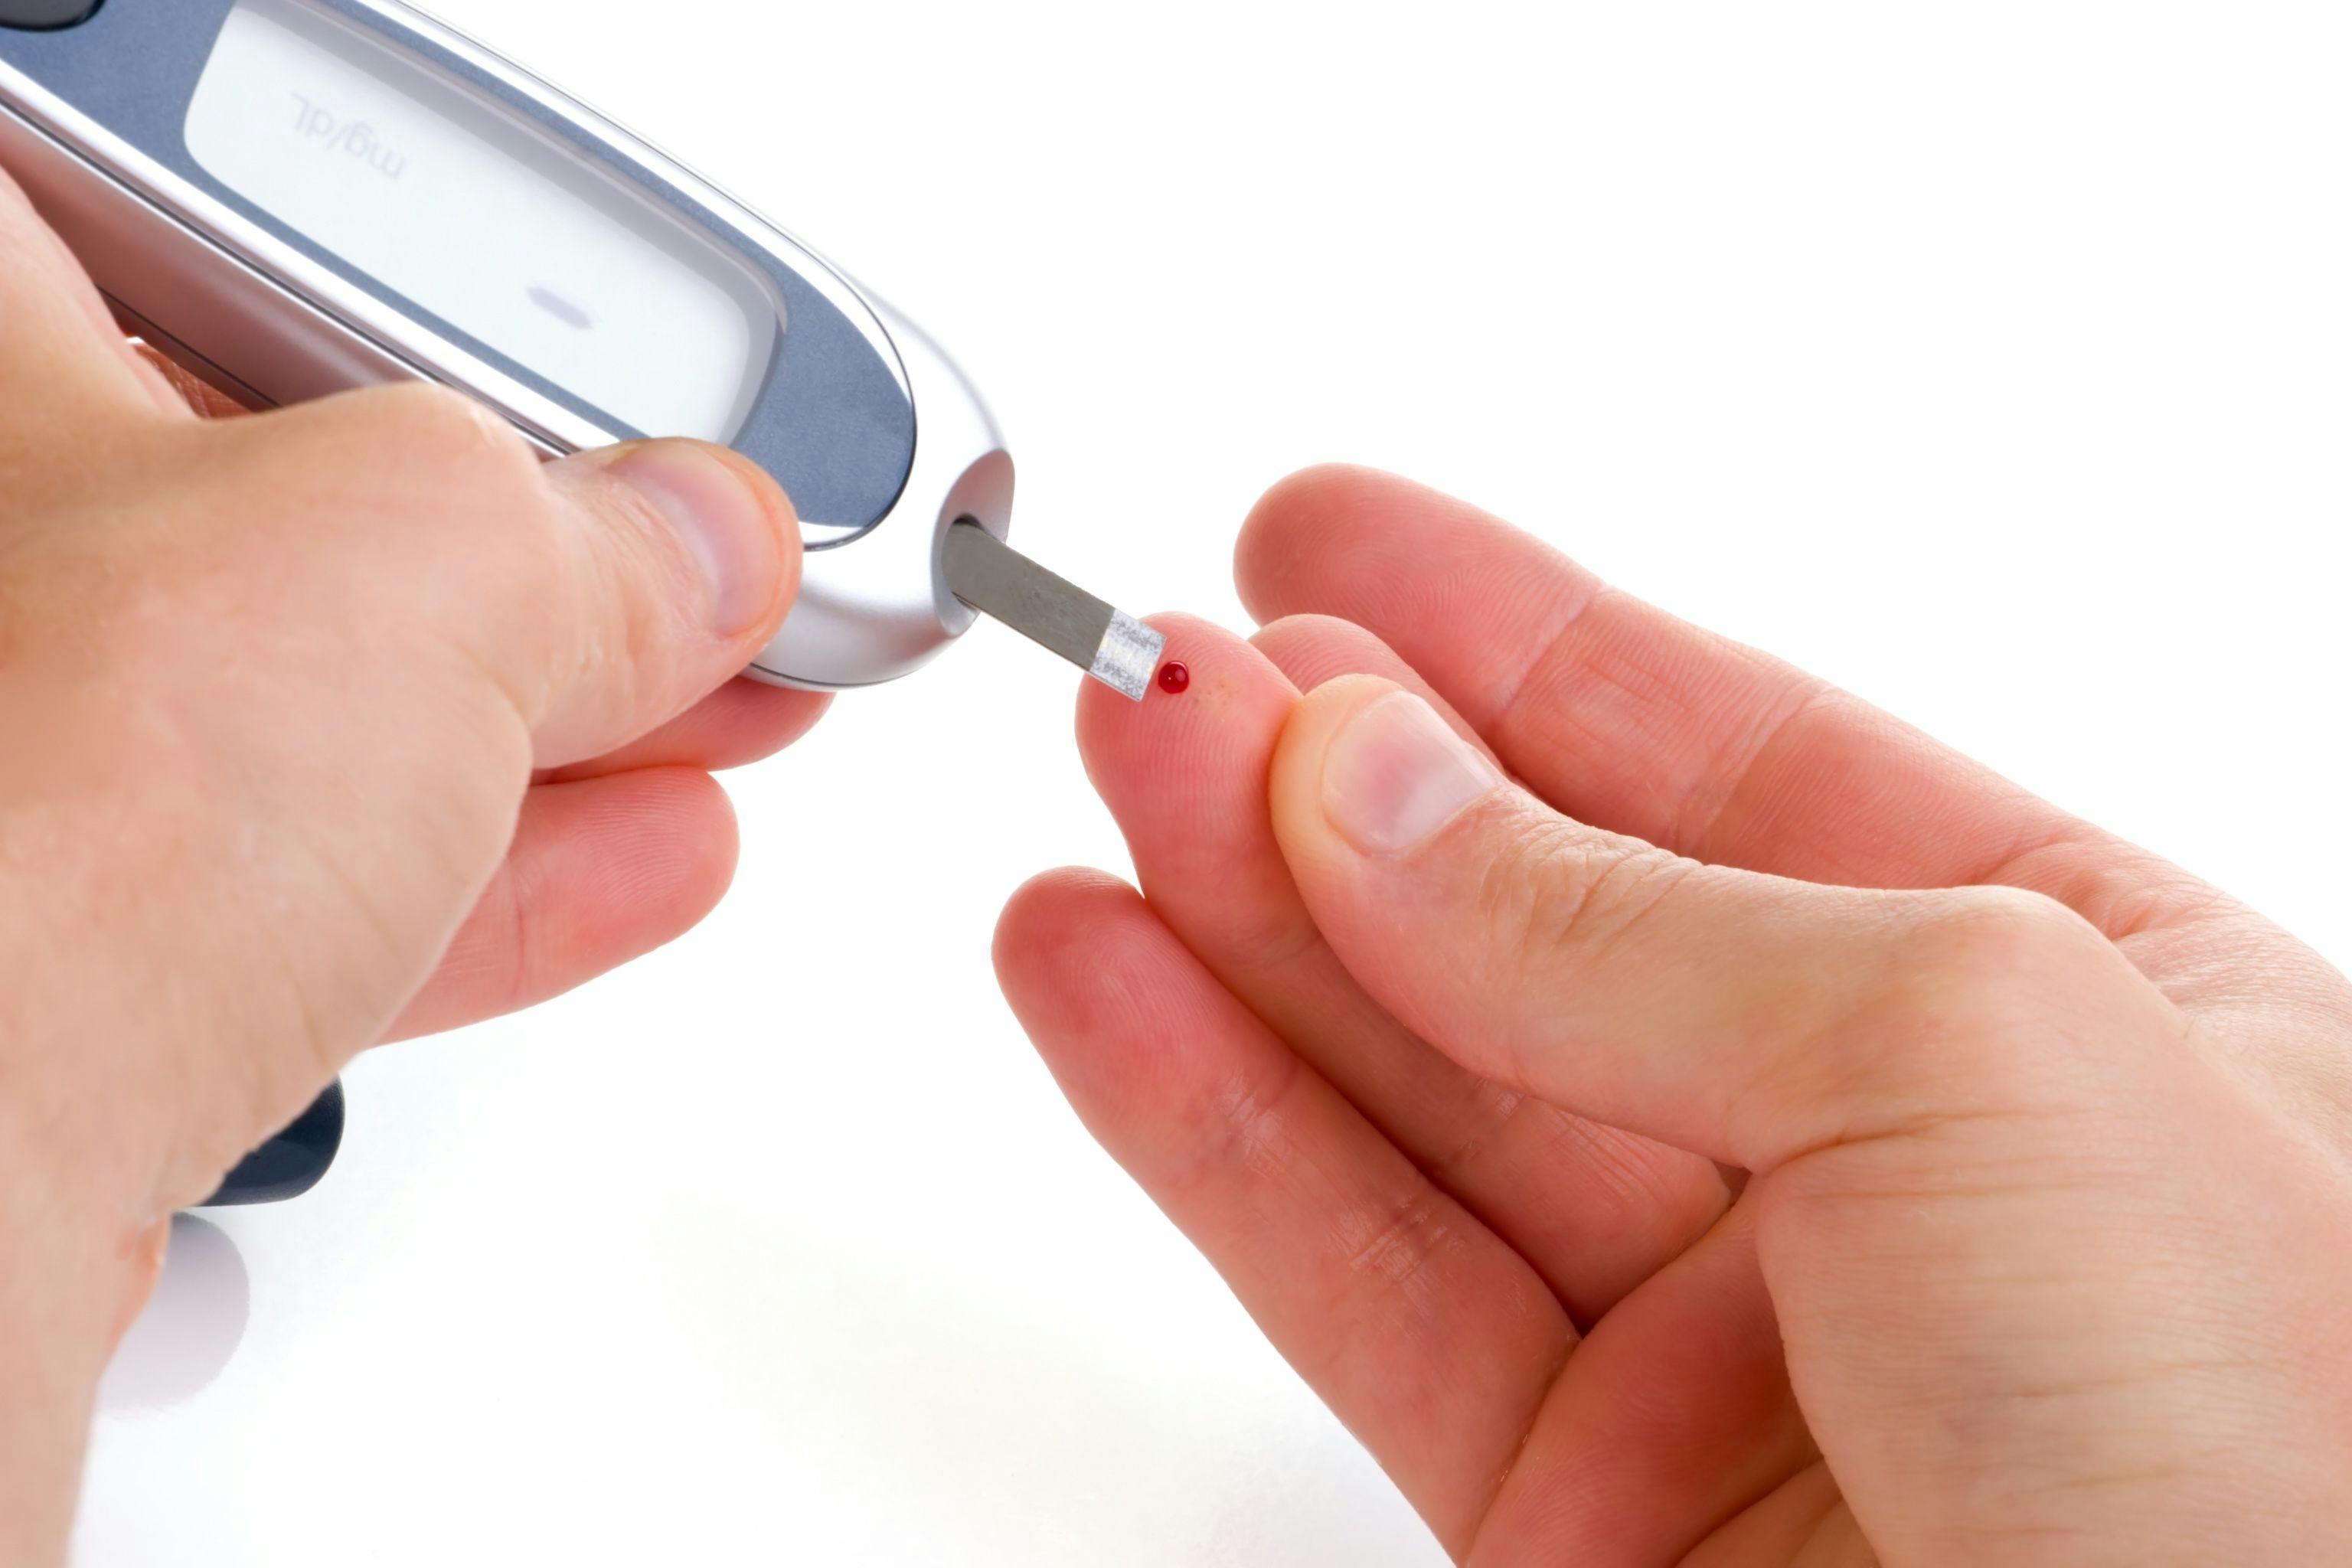 Person with diabetes checking their blood glucose levels.